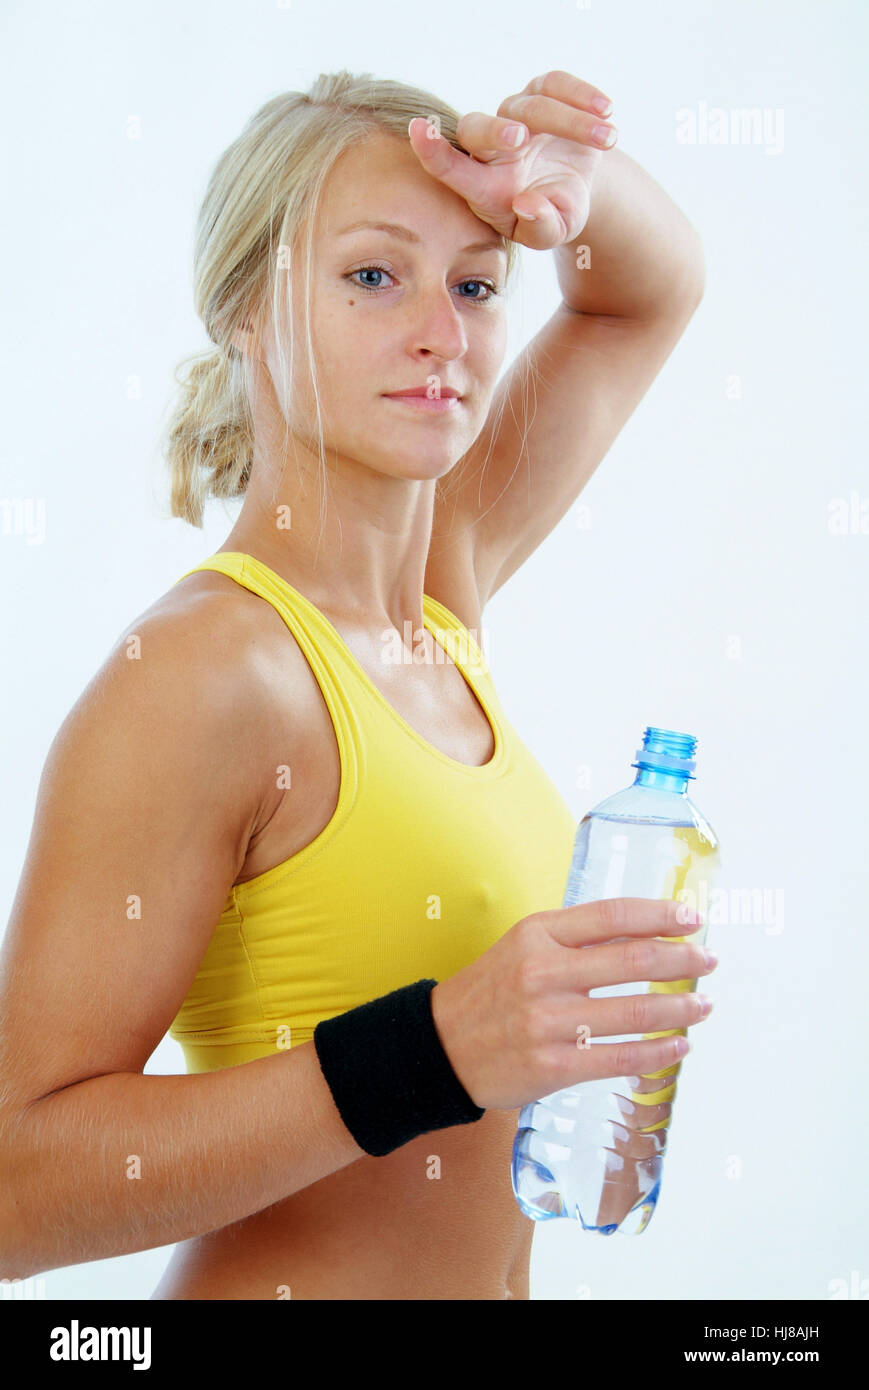 Worn out woman after training Stock Photo